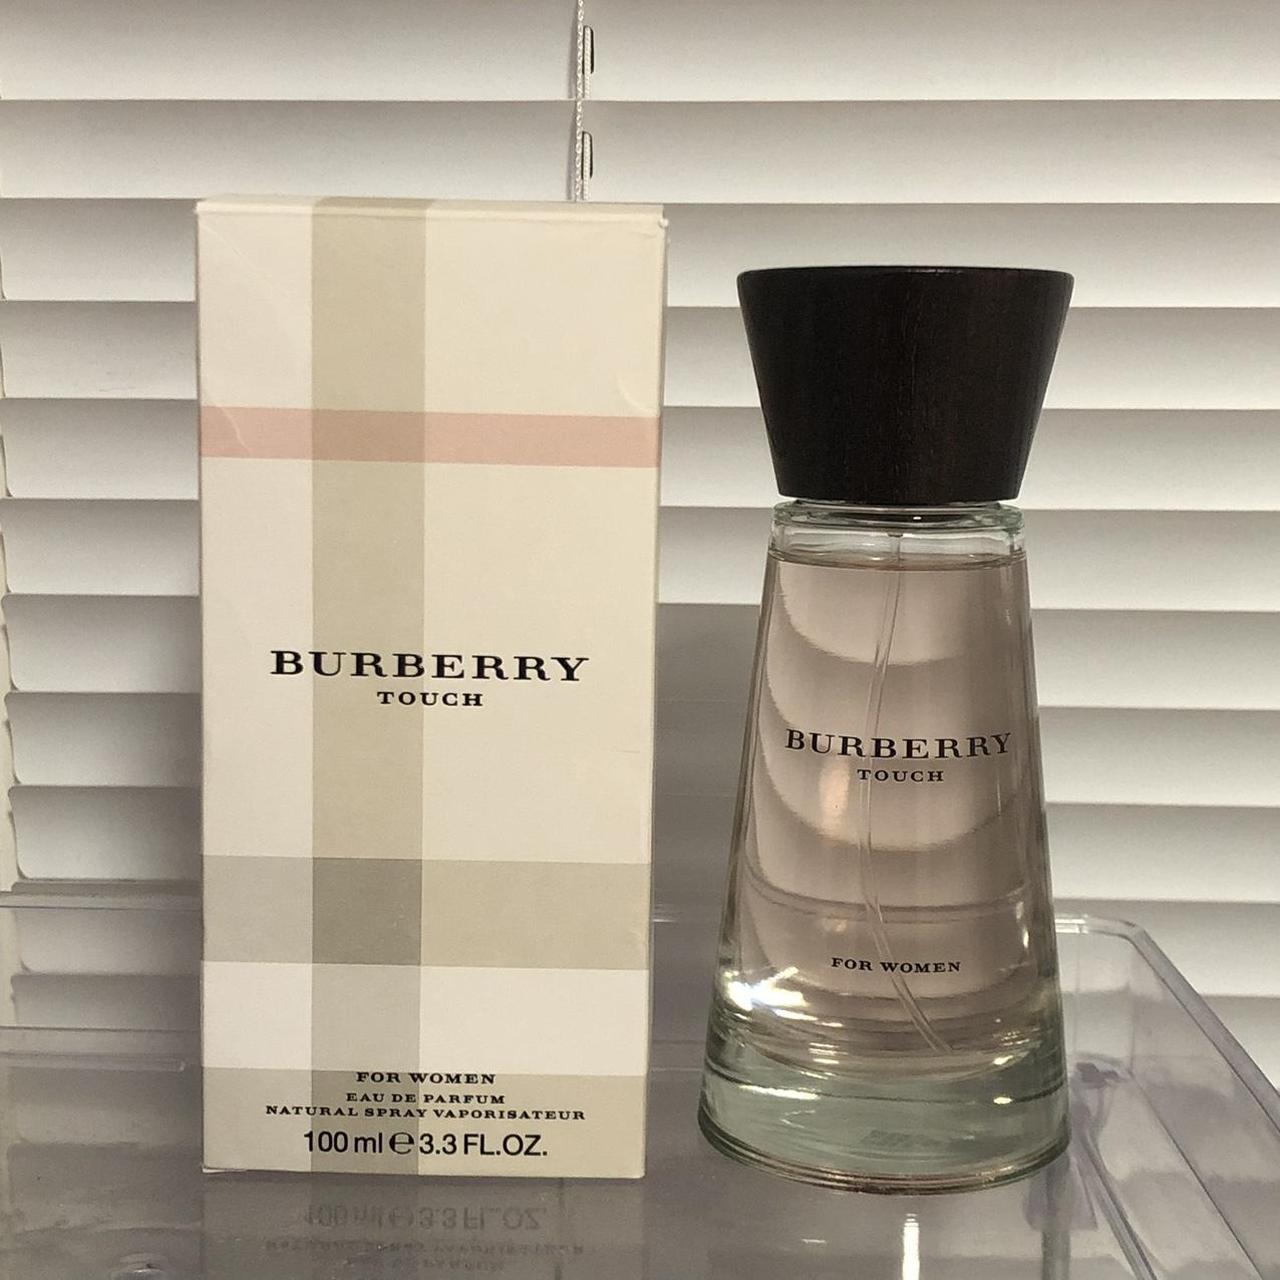 DM Before Buying • Burberry EDP Touch - Depop for Women